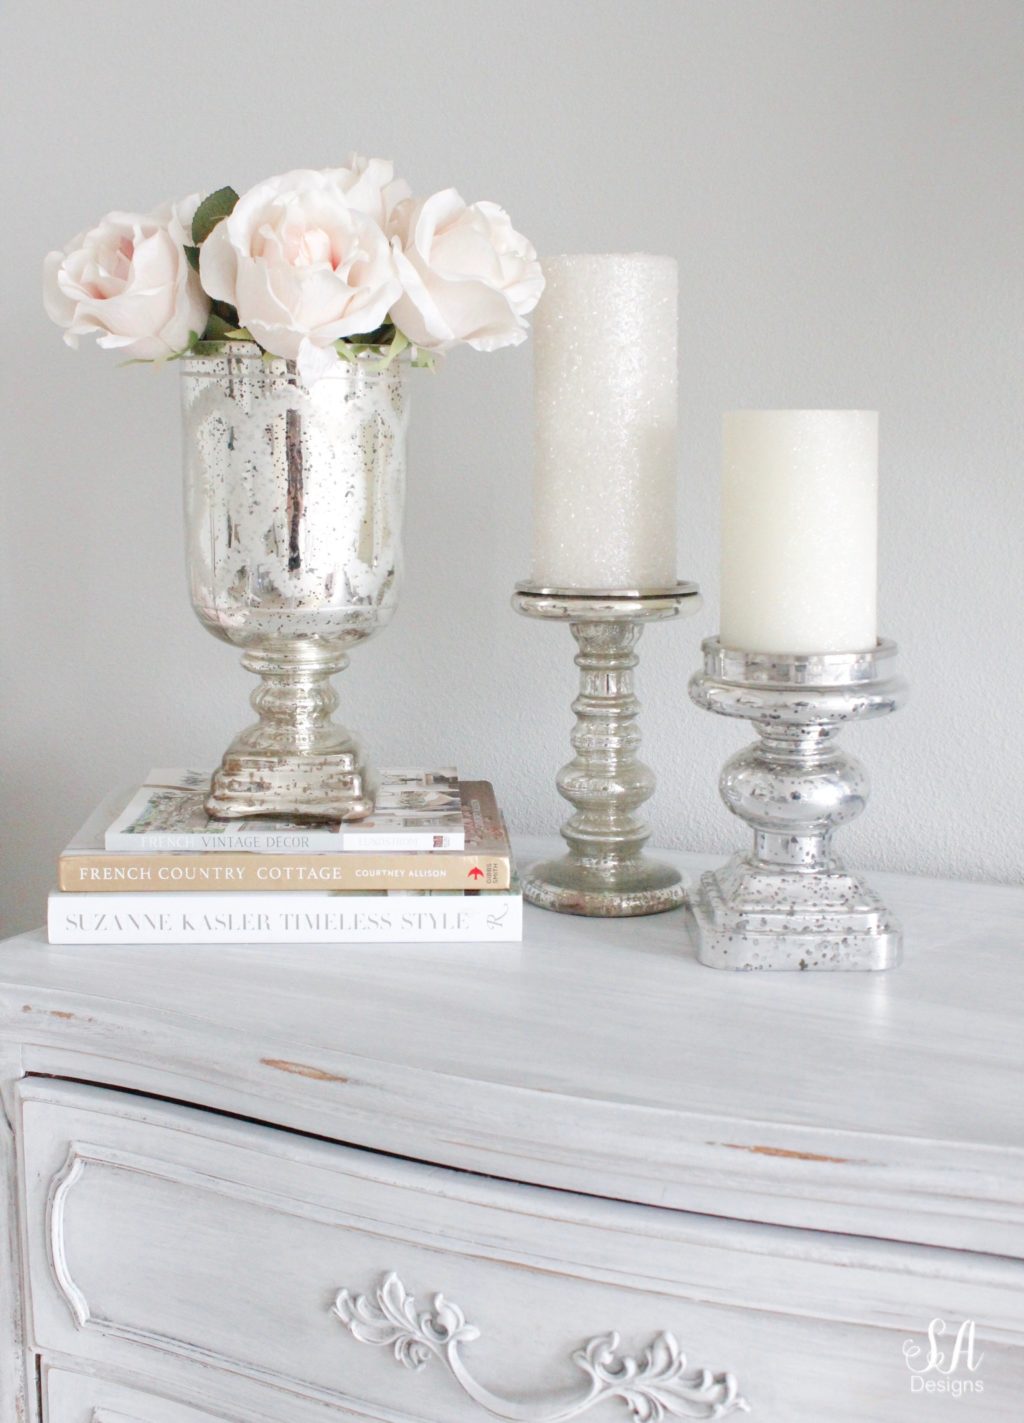 The Coffee Table Books I Love and Use for Styling - Color & Chic